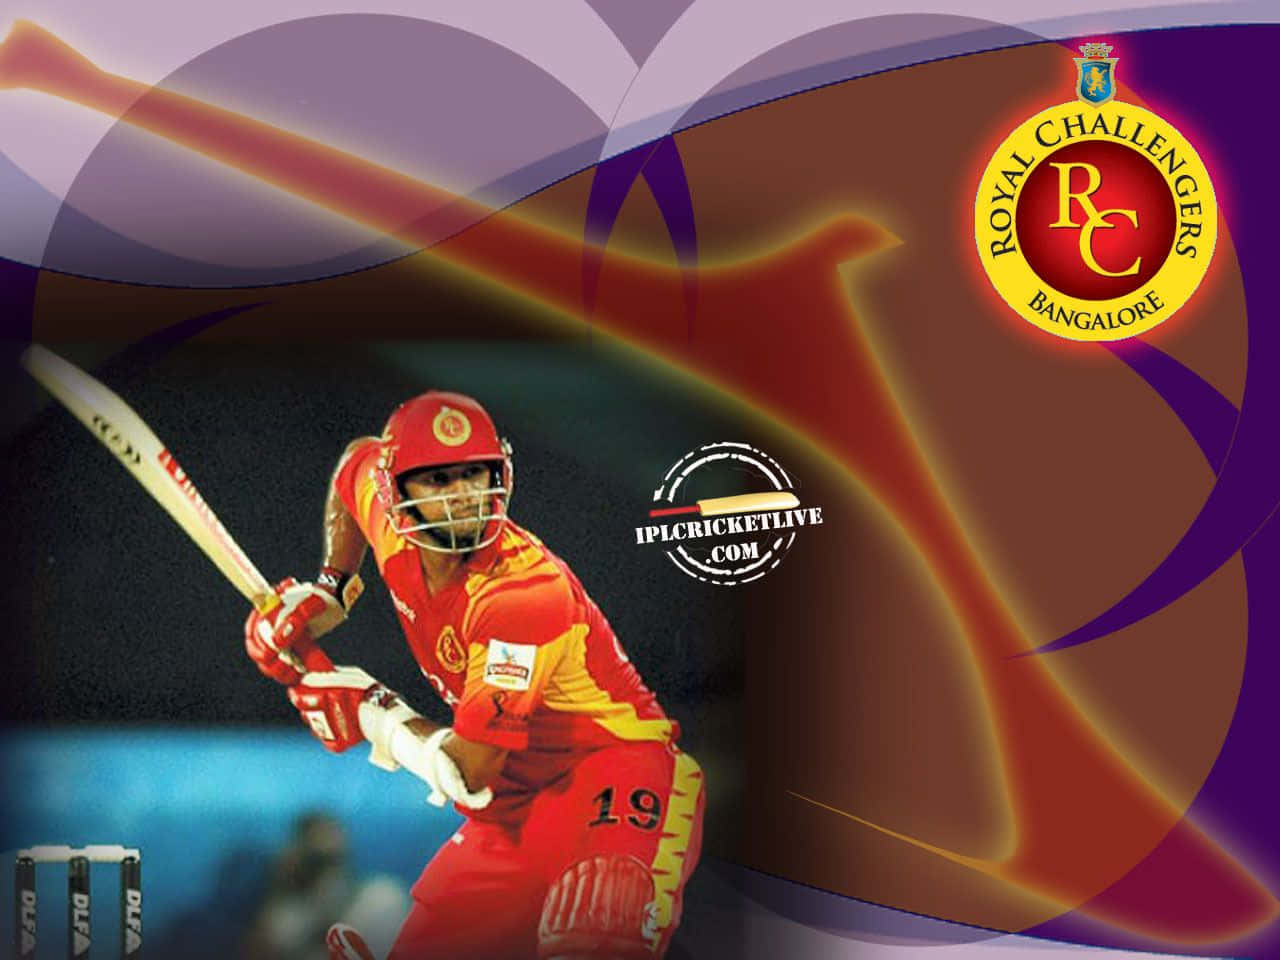 RCB: Rise with passion